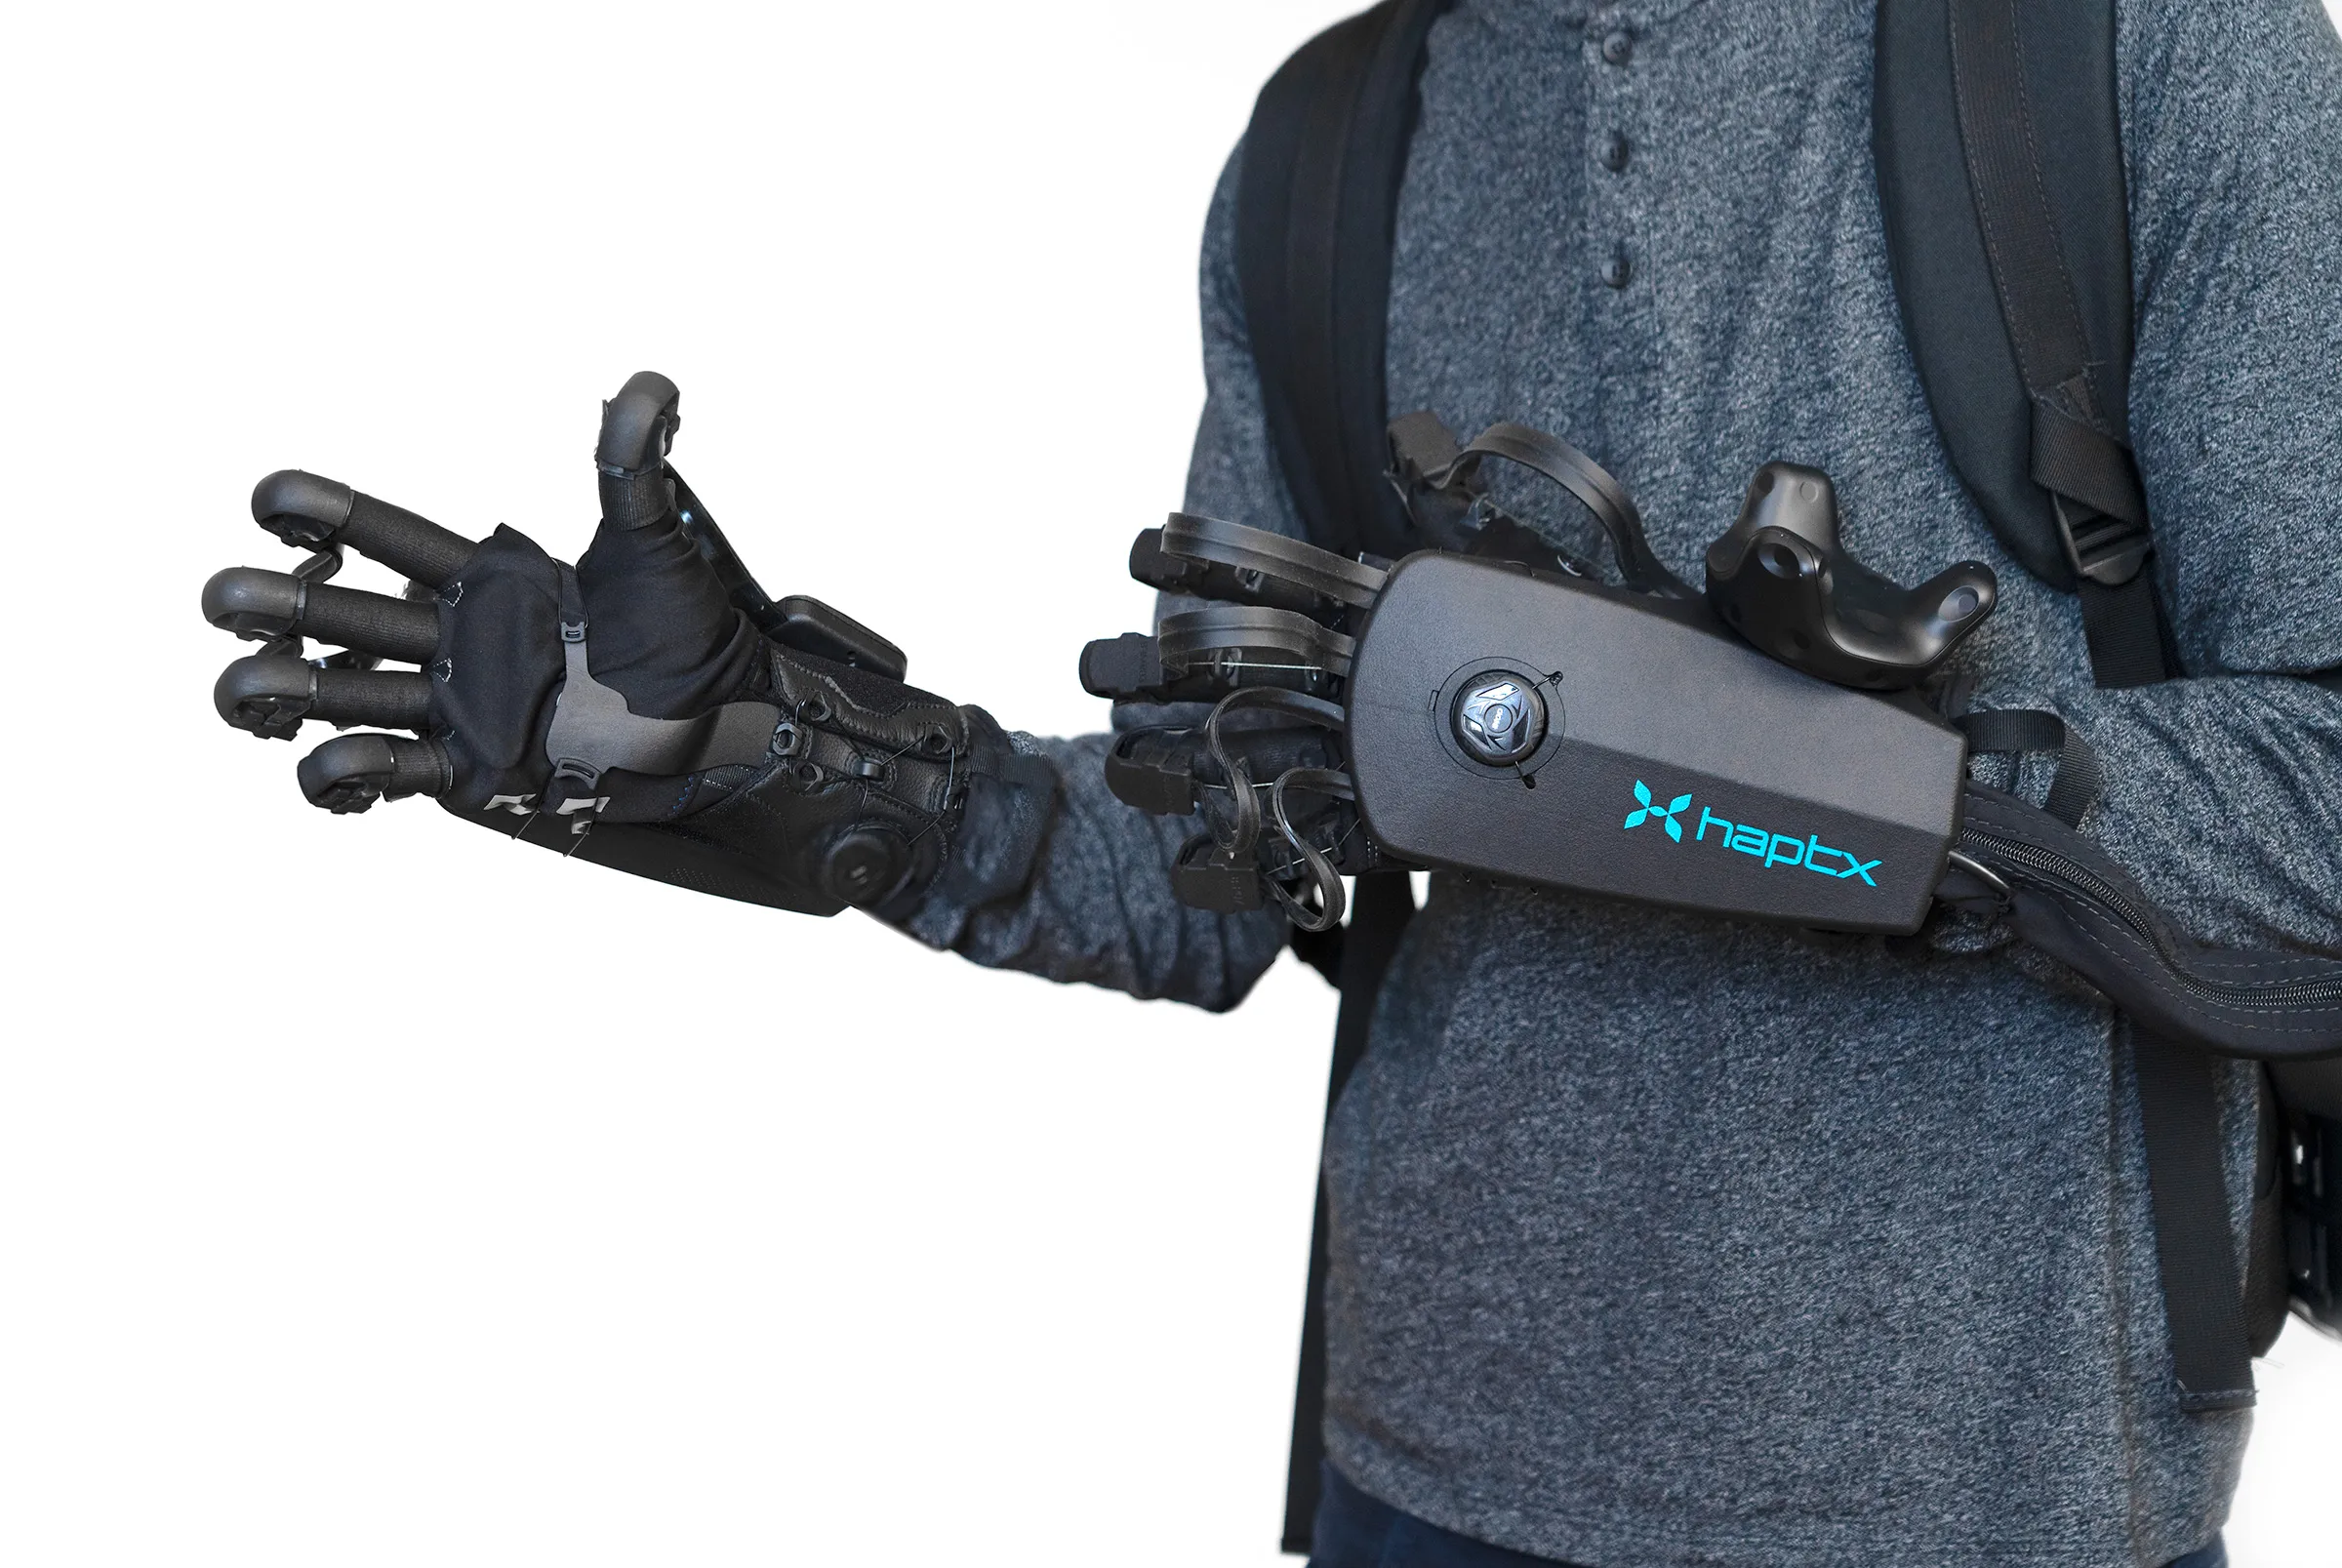 virtual reality haptic gloves worn on model hands